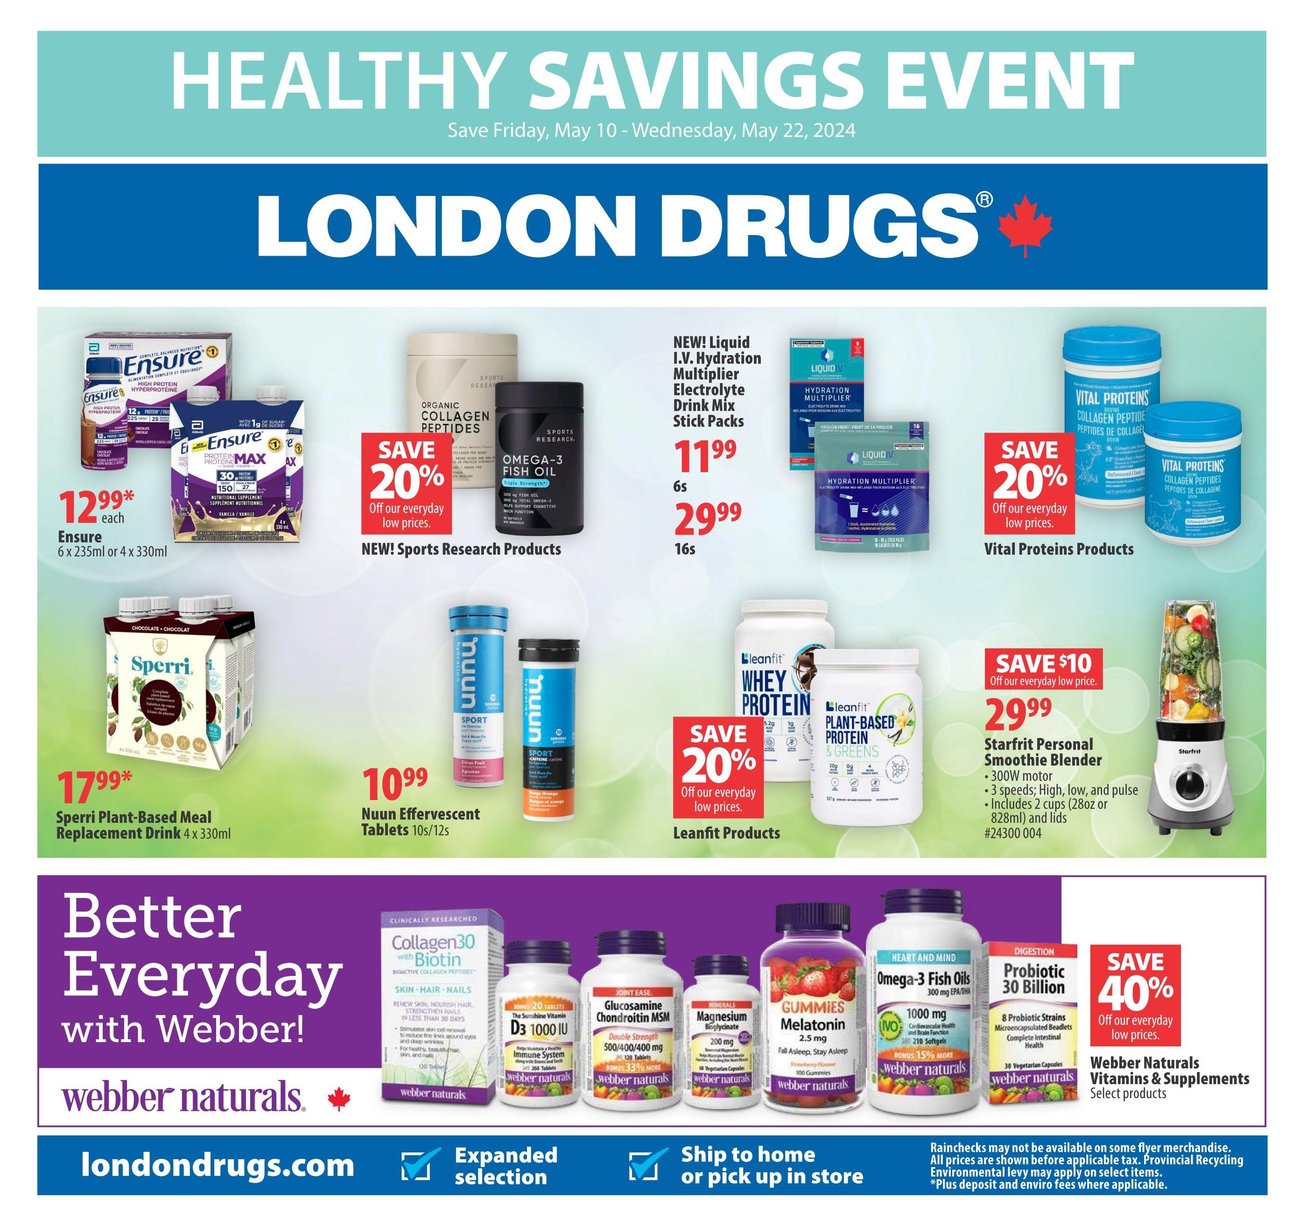 London Drugs - Healthy Savings Event - Page 1